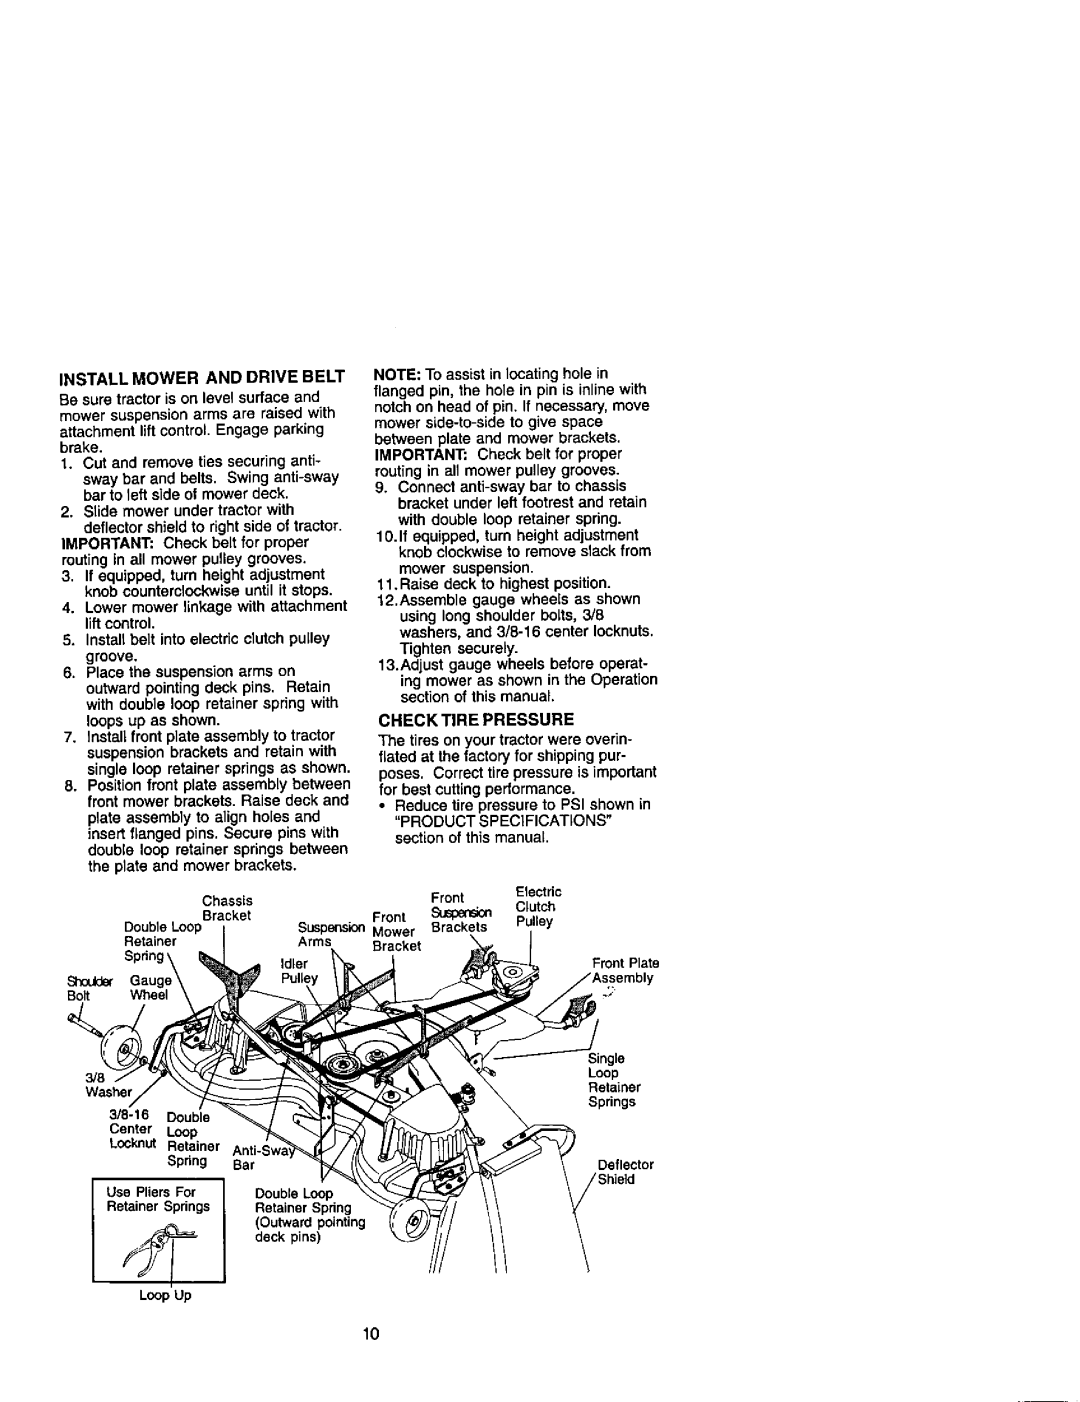 Craftsman 917.27499 manual Install Mower And Drive Belt 